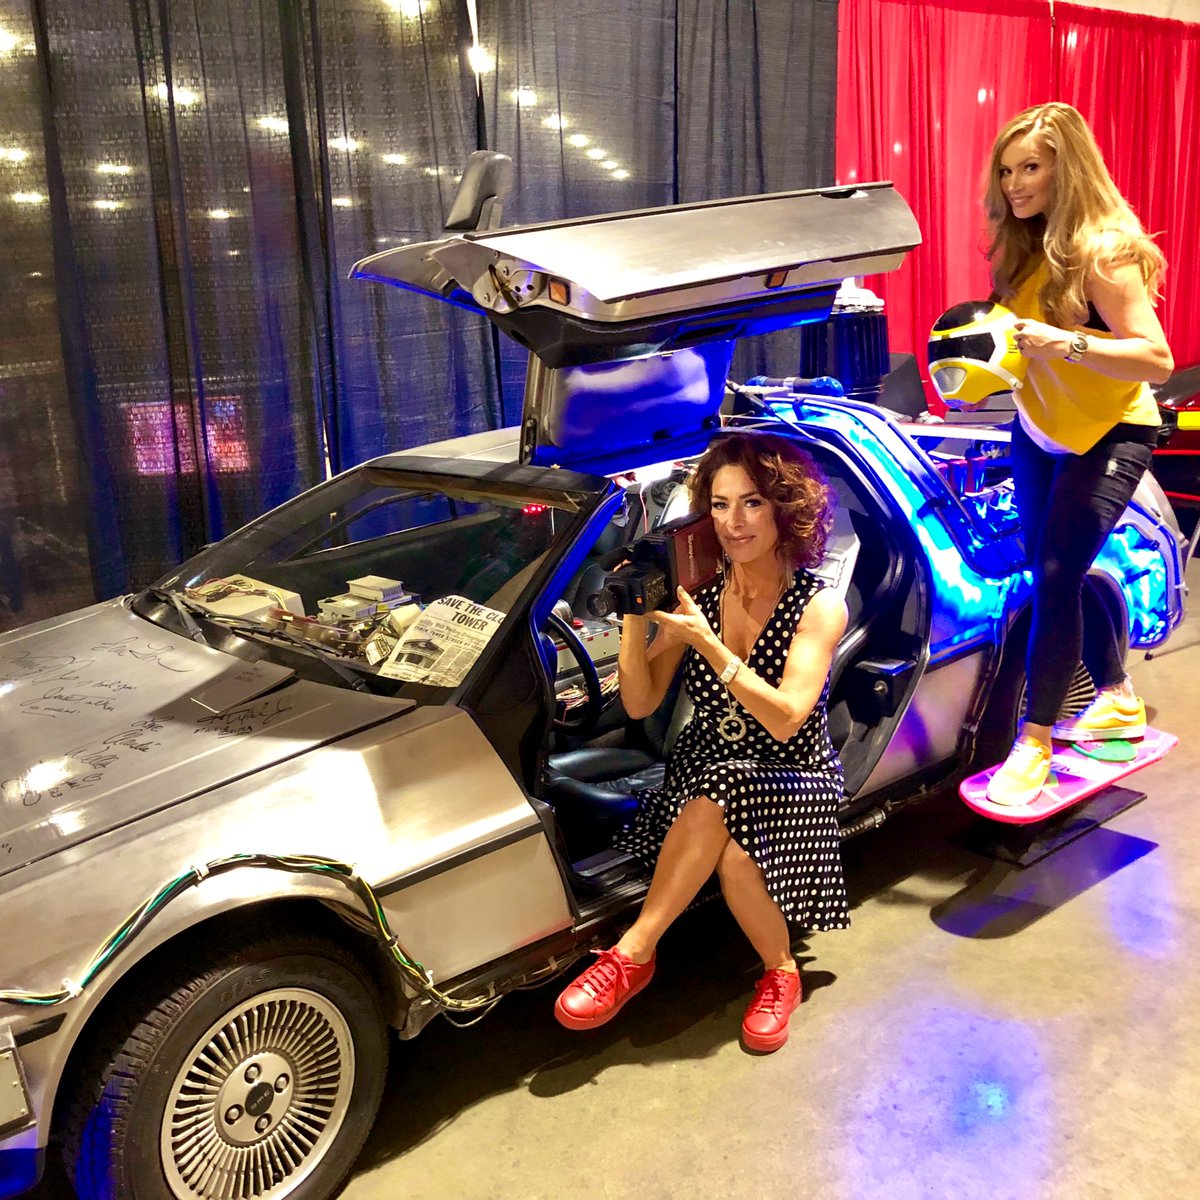 #Throwback with the lovely #BackToTheFuture ⭐️ #ClaudiaWells aka #JenniferParker from @BacktotheFuture #BTTF ⚡️

#ThrowbackThursday #TBT #TBThursday #iCCCon #iCCCNashville @ICCCNashville @TheClaudiaWells